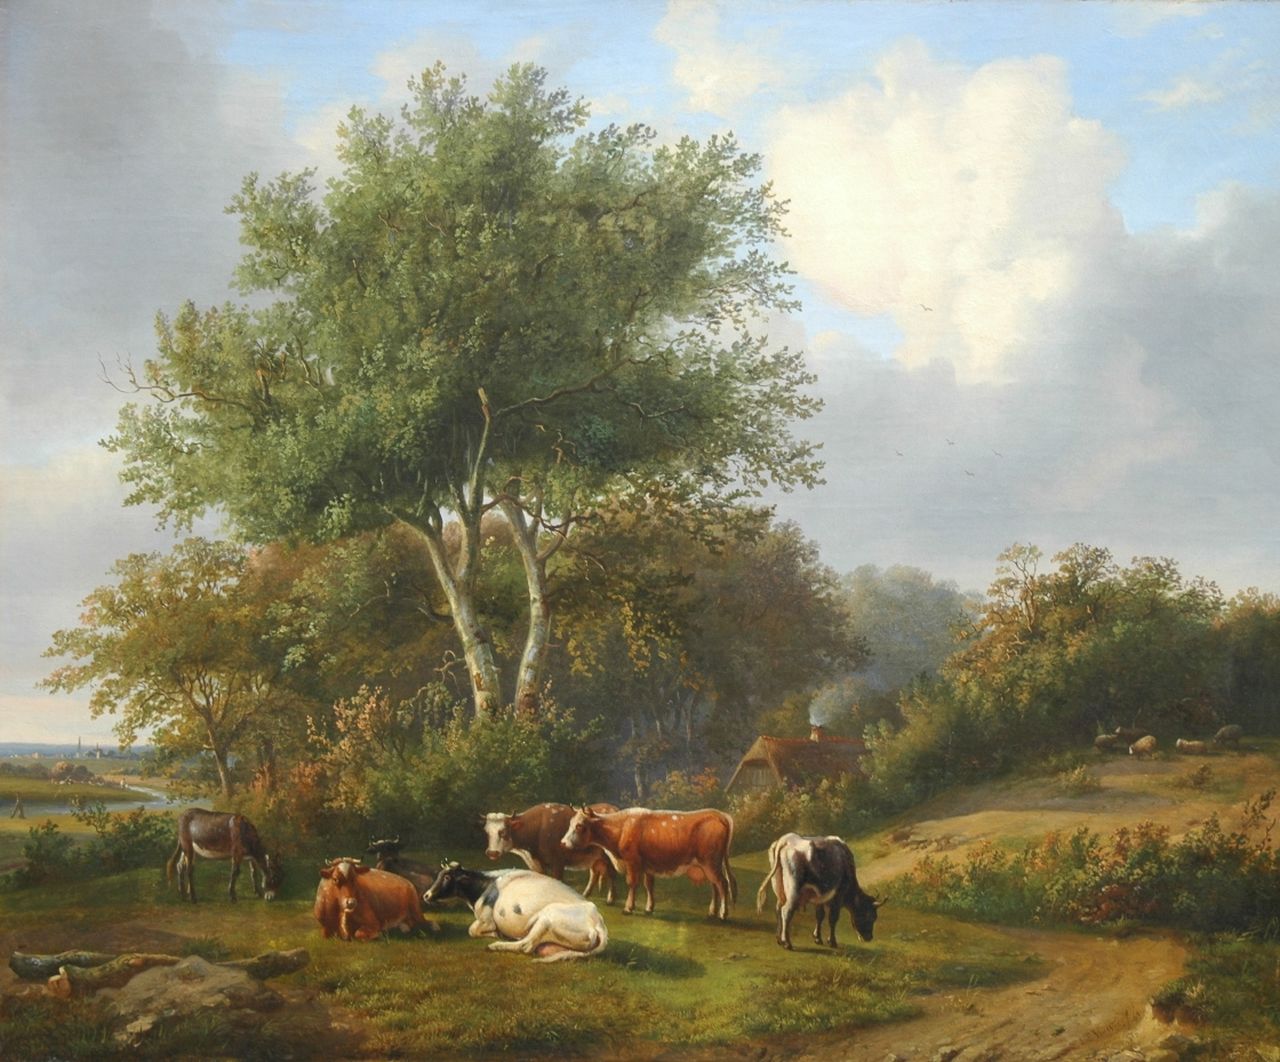 Verwee L.P.  | Louis Pierre Verwee, Grazing cattle, oil on canvas 63.2 x 77.0 cm, signed l.l. and dated 1843